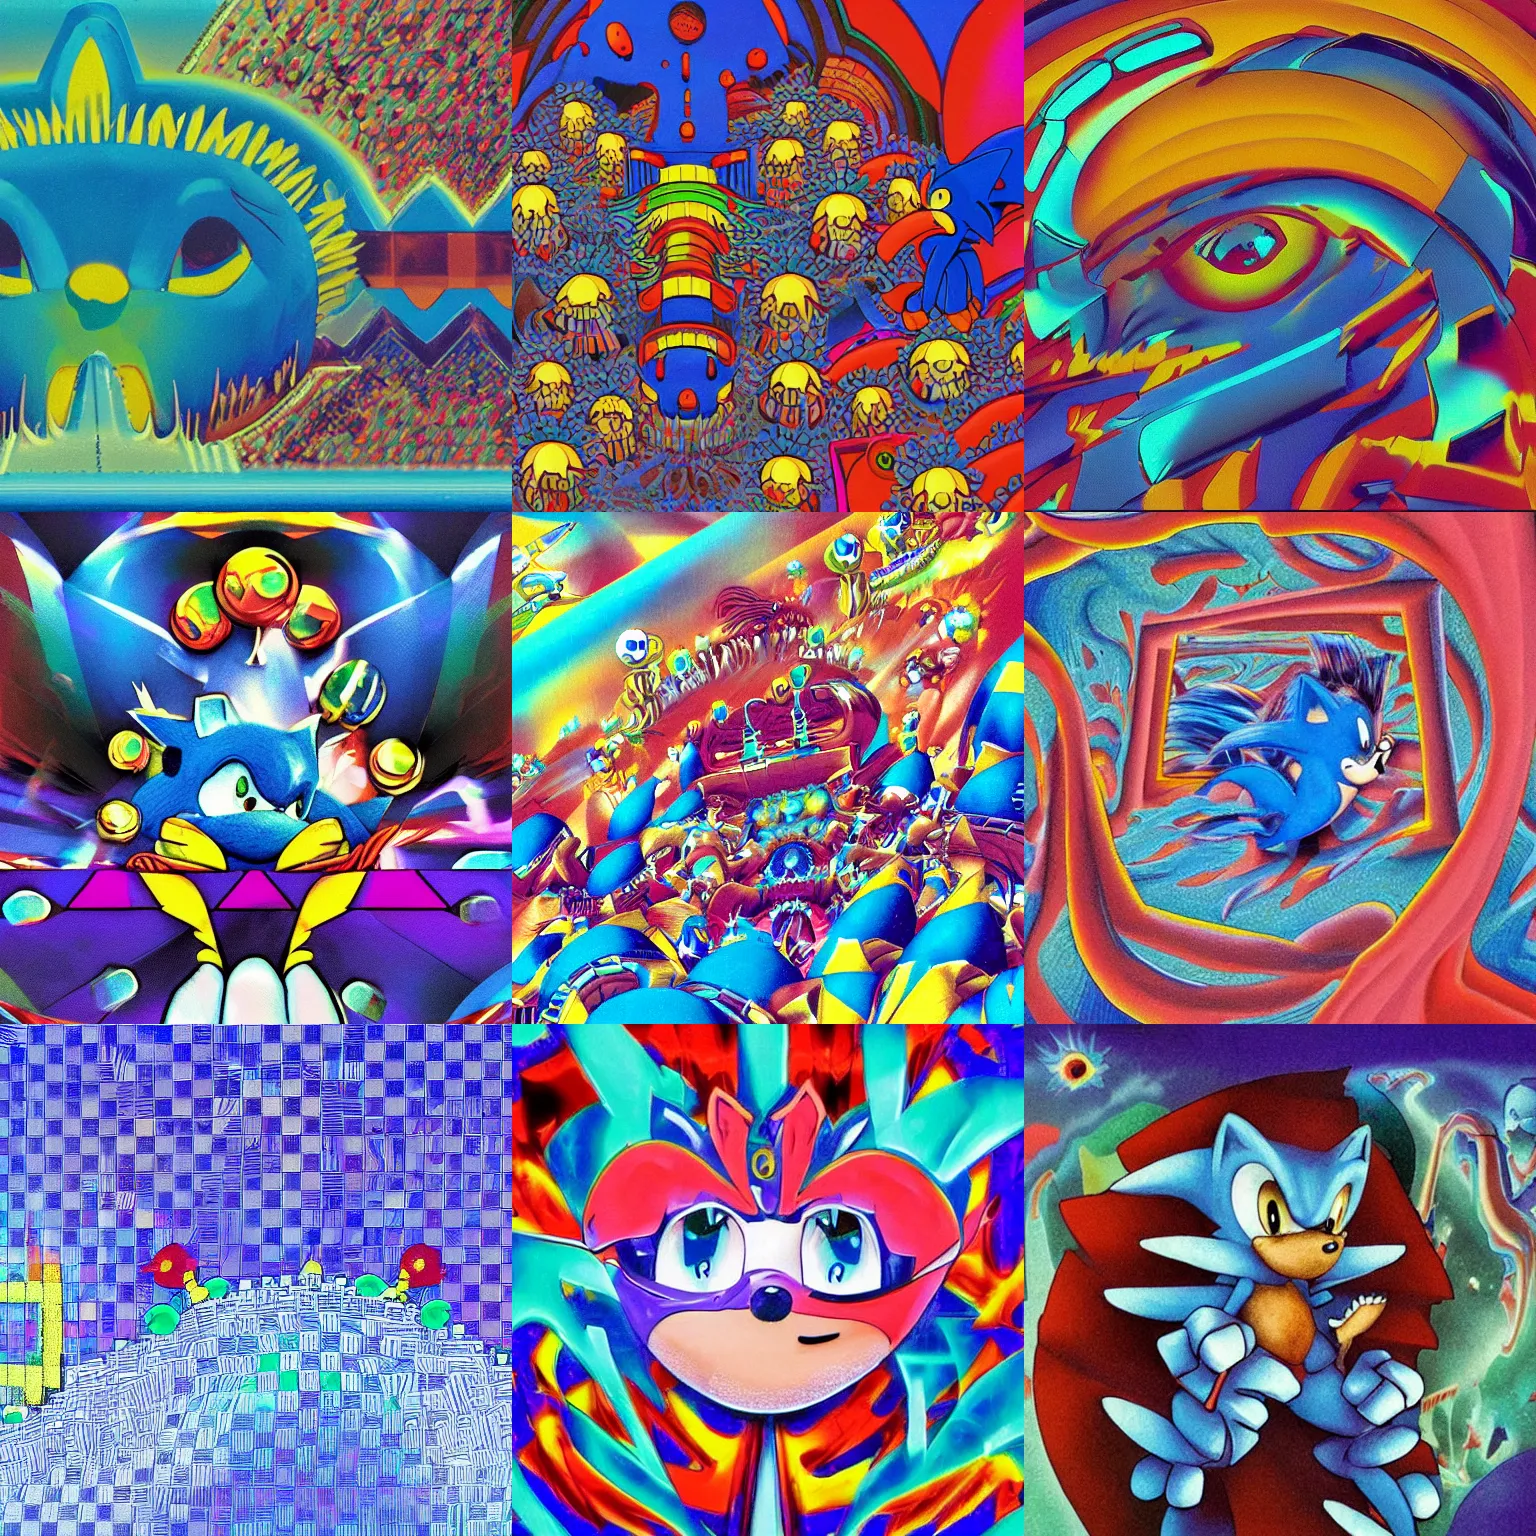 Prompt: close up retro sonic the hedgehog checkerboard horizon in a surreal, soft, ornate, professional, high quality airbrush art mgmt shpongle album cover of a chrome dissolving LSD DMT blue sonic the hedgehog surfing through vaporwave caves, , 1980s 1982 Sega Genesis video game album cover